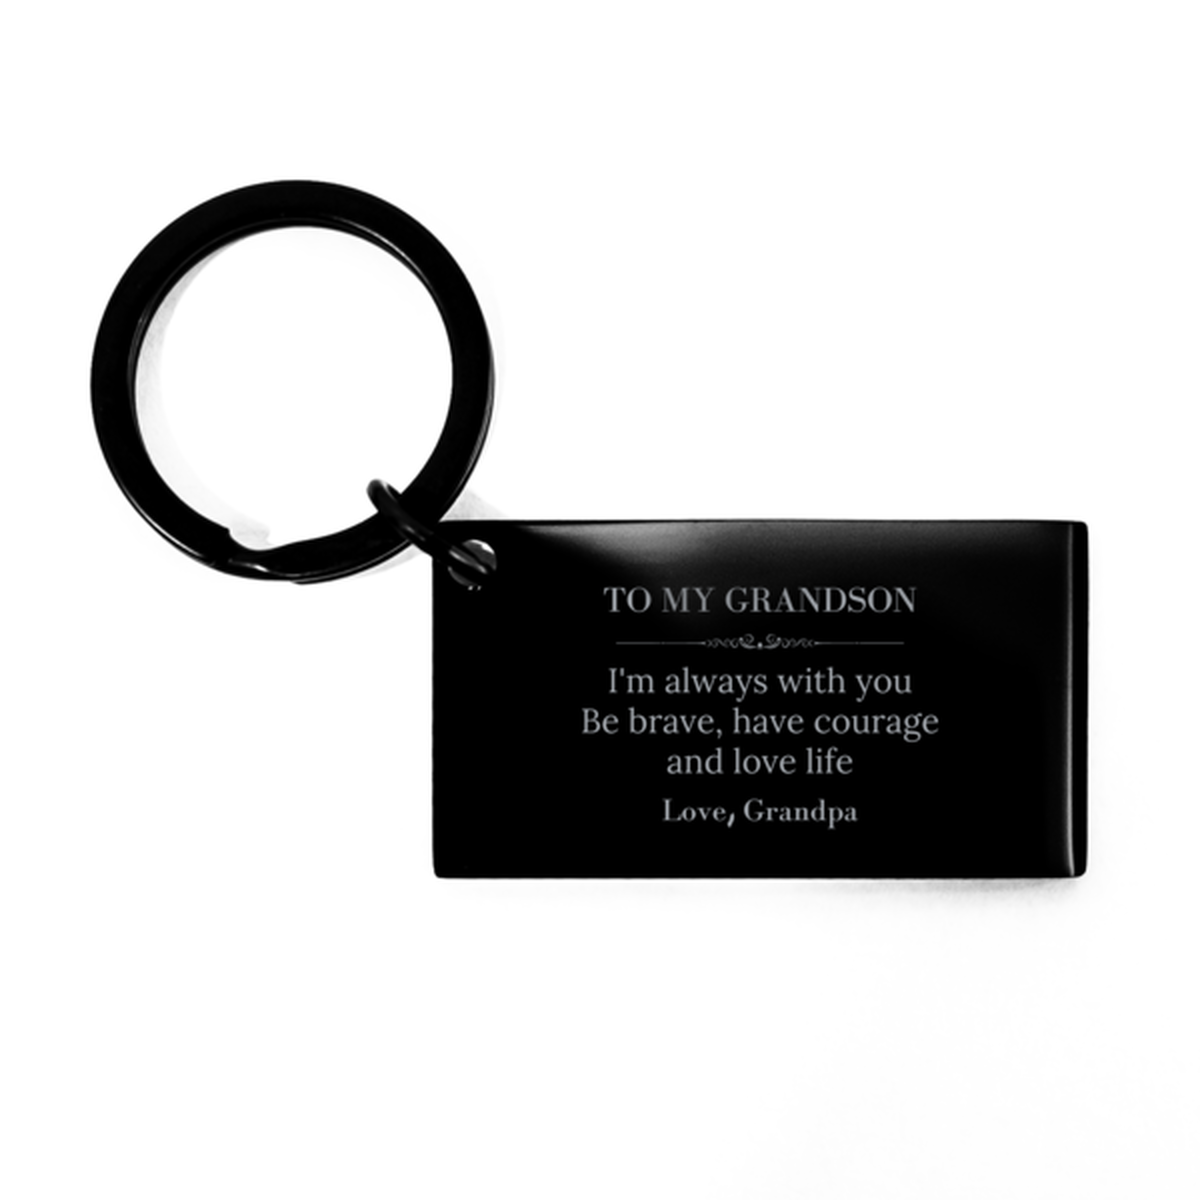 To My Grandson Gifts from Grandpa, Unique Keychain Inspirational Christmas Birthday Graduation Gifts for Grandson I'm always with you. Be brave, have courage and love life. Love, Grandpa